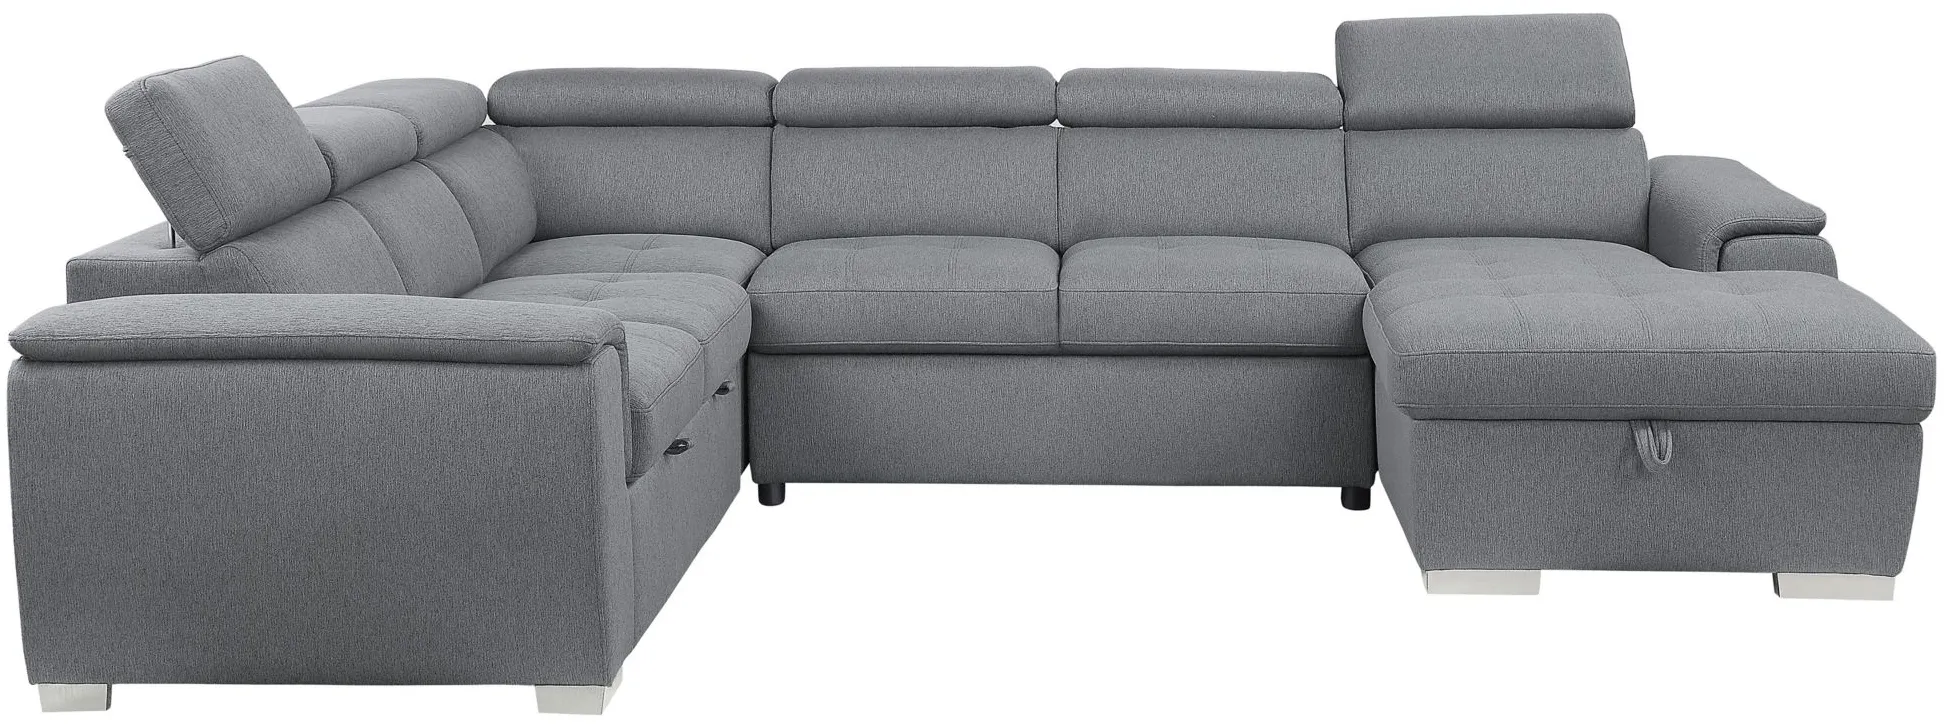 Solomon 4-pc Sectional With Pull-Out Bed in Gray by Homelegance